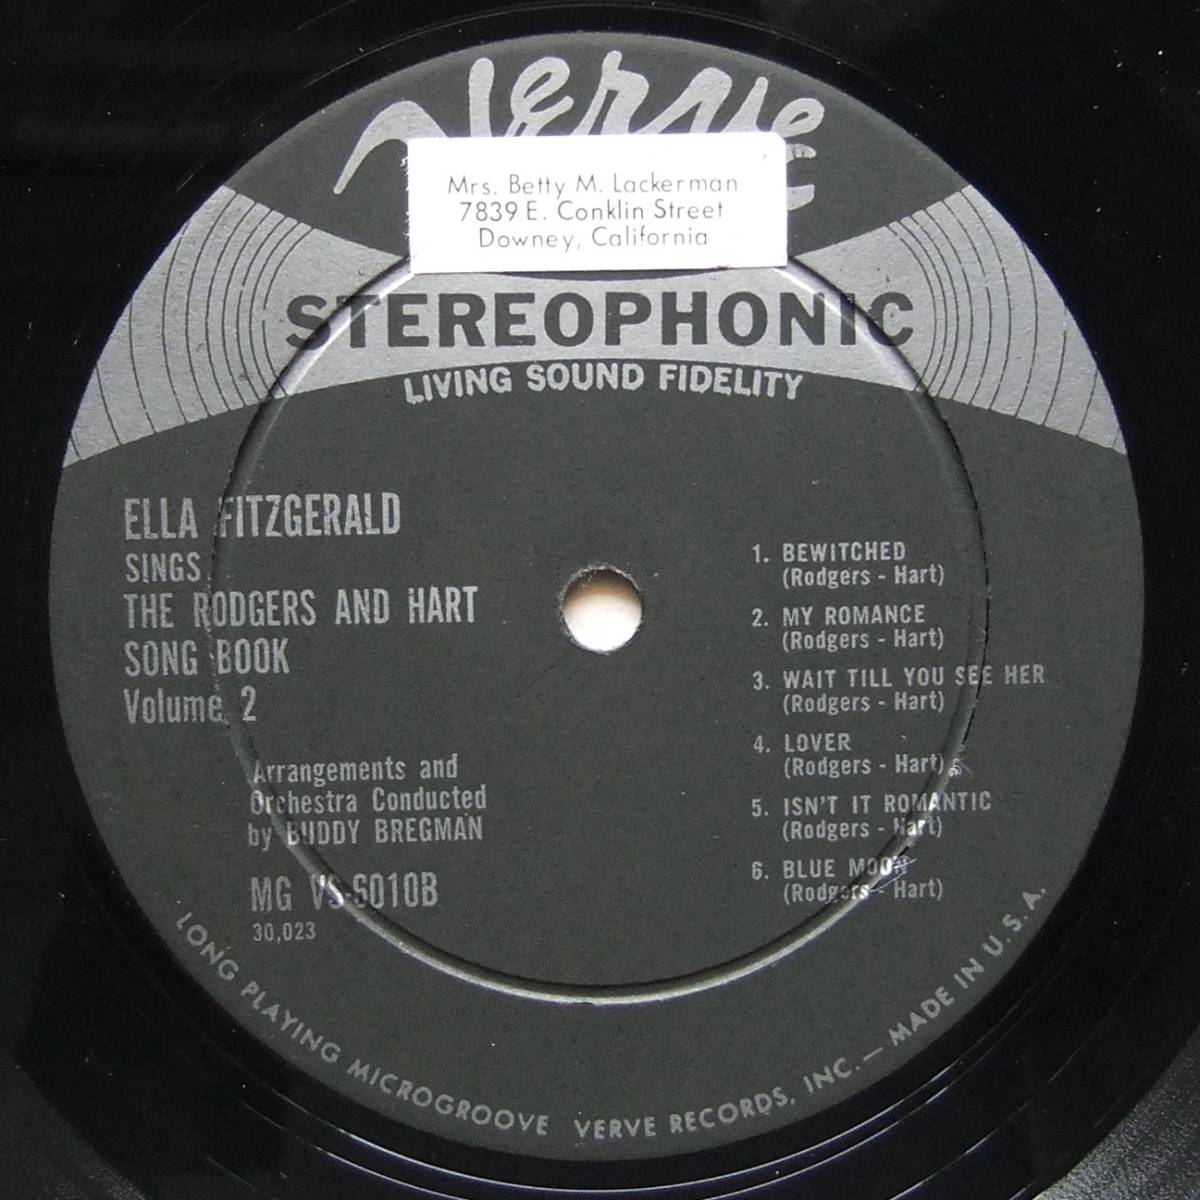 ◆ ELLA FITZGERALD / Sings Rodgers and Hart Song Book Volume 2 ◆ Verve MGVS-6010 (VRI:dg) ◆_画像4